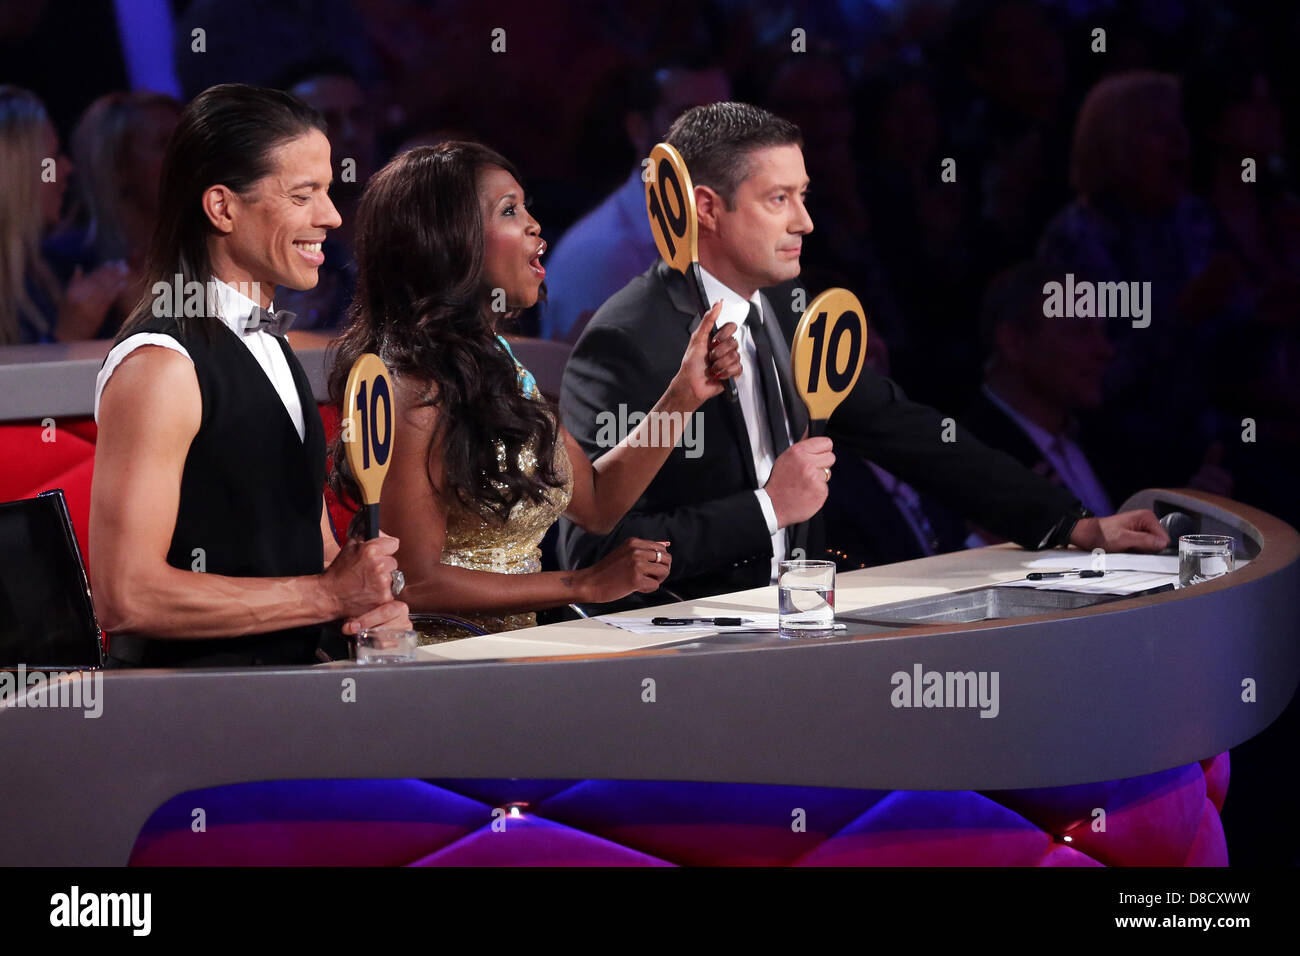 Members of the jury (L-R) Jorge Gonzalez, Motsi Mabuse and Joachim Llambi are during the dance show 'Let's Dance' of broadcaster RTL at Coloneum in Cologne, Germany, 24 May 2013. Photo: Rolf Vennenbernd Stock Photo